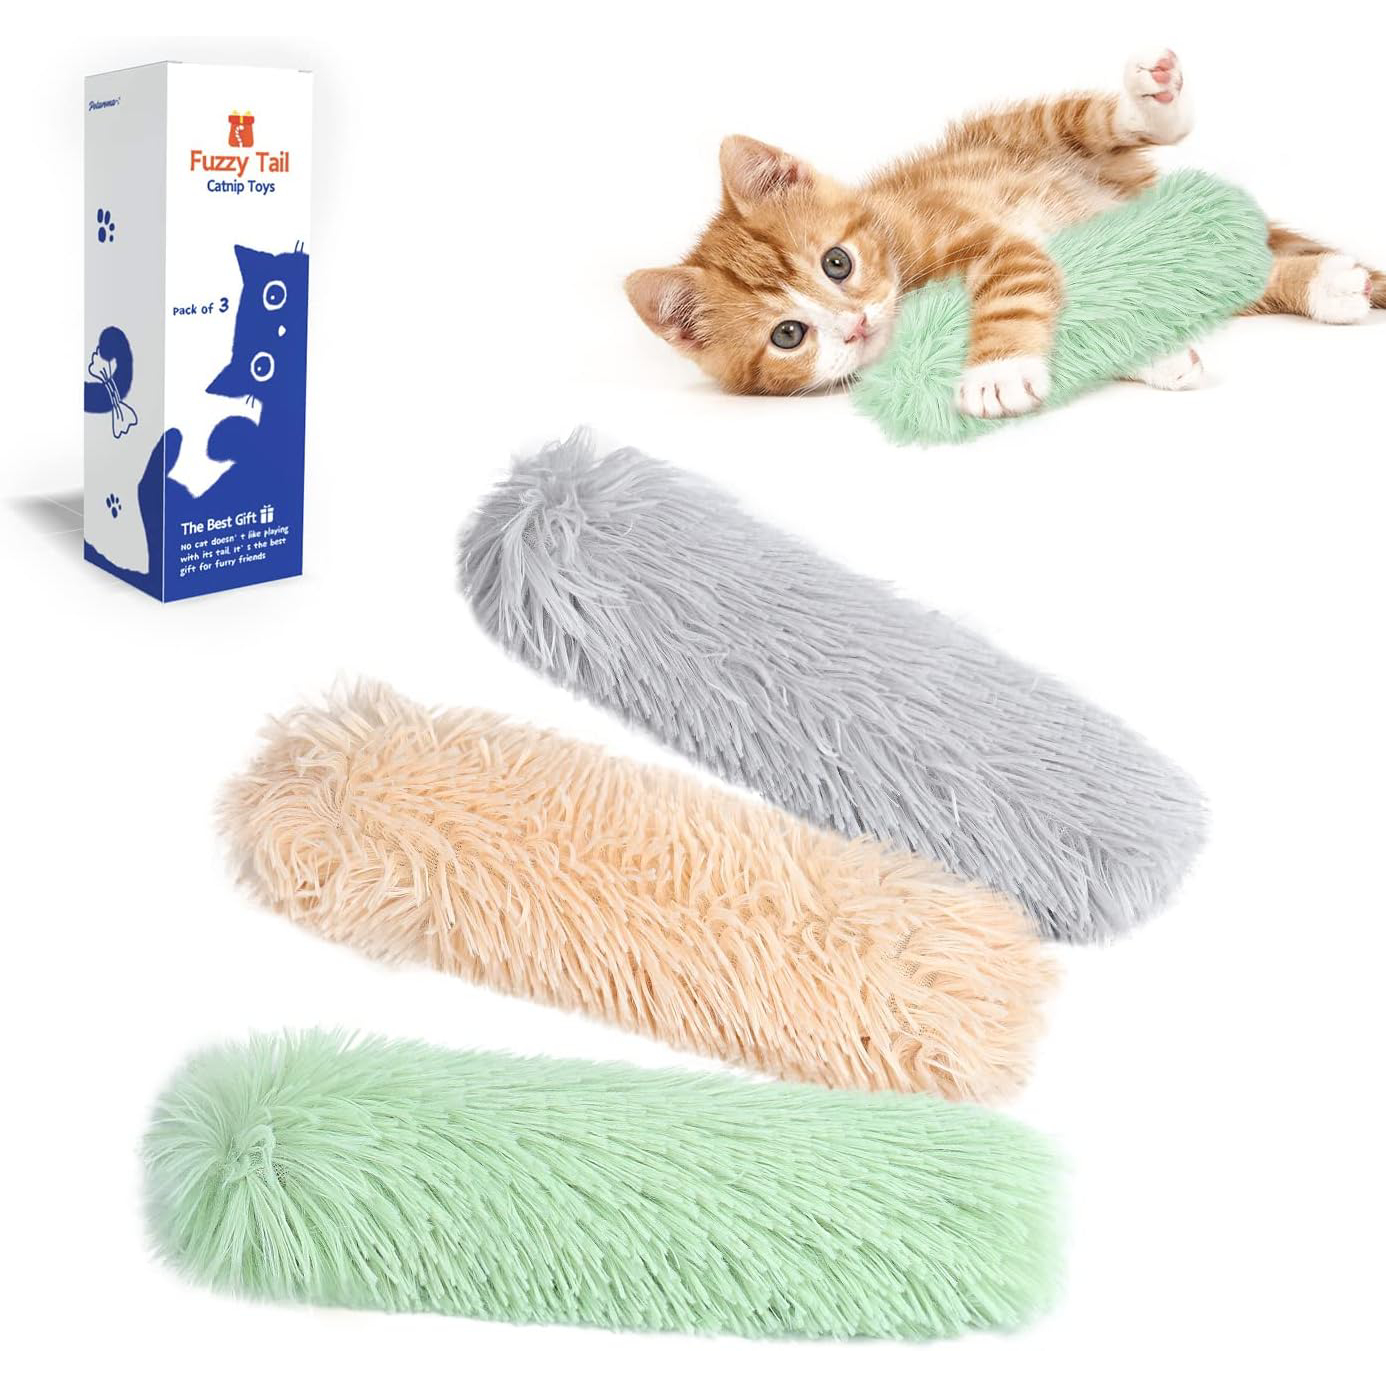 Potaroma Cat Toys Cat Pillows, 3 Pack Soft and Durable Crinkle Sound Catnip Toys, Interactive Cat Kicker Toys for Indoor Cats, Promotes Kitten Exercise New